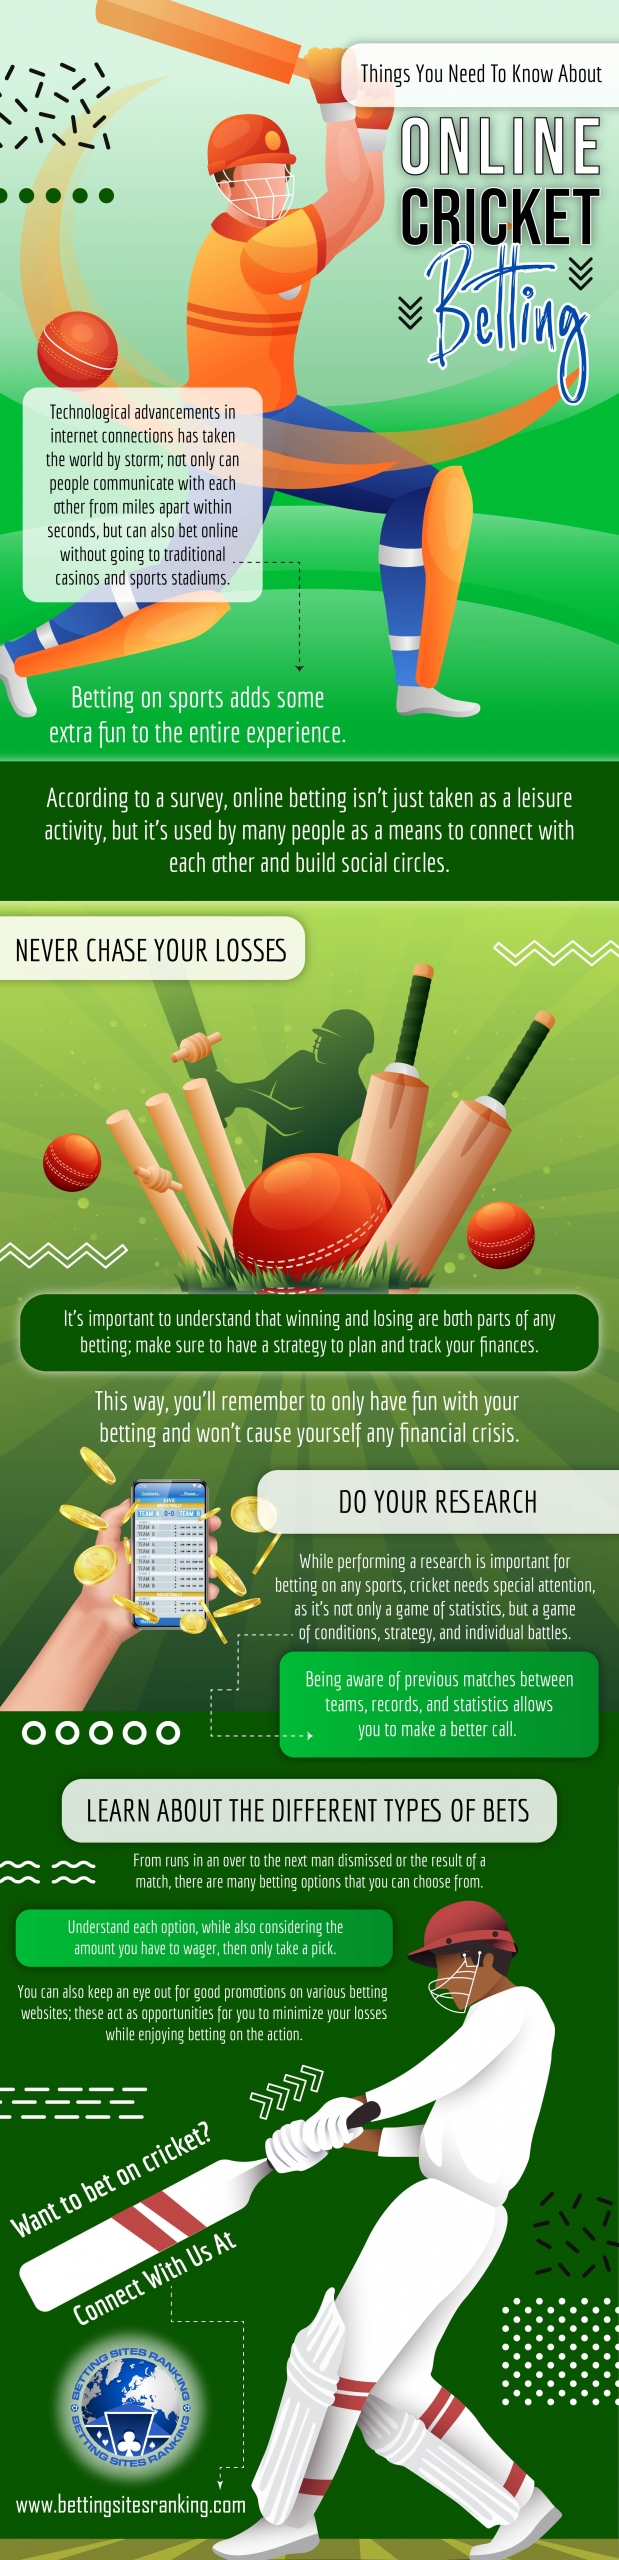 Things-you-need-to-know-about-online-cricket-betting